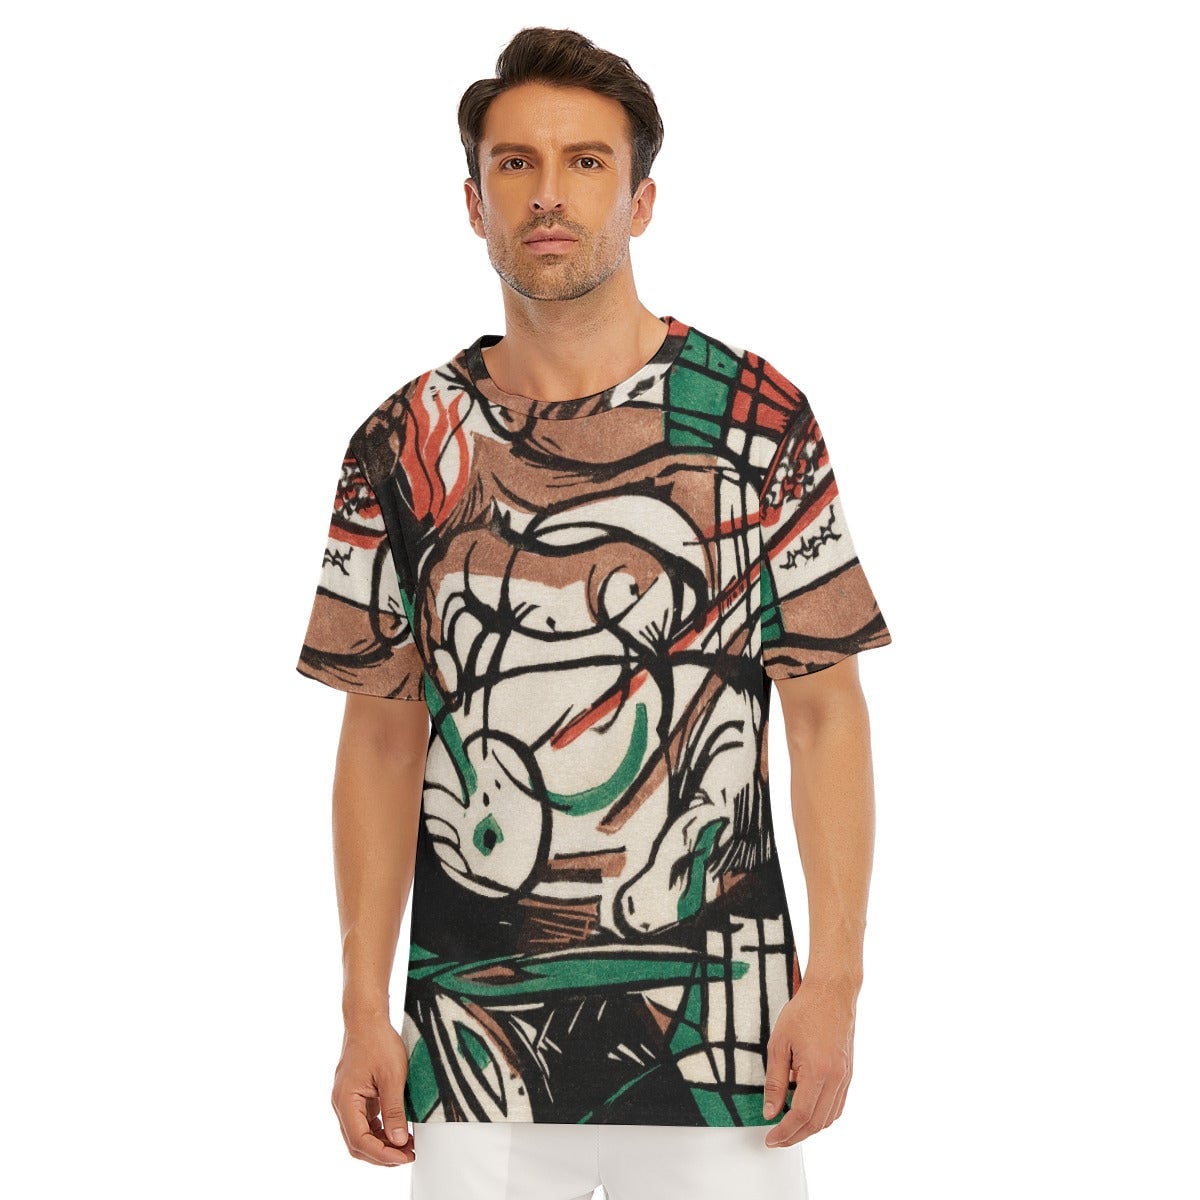 Franz Marc’s Birth of Horses T-Shirt - Perfect for Art Lover